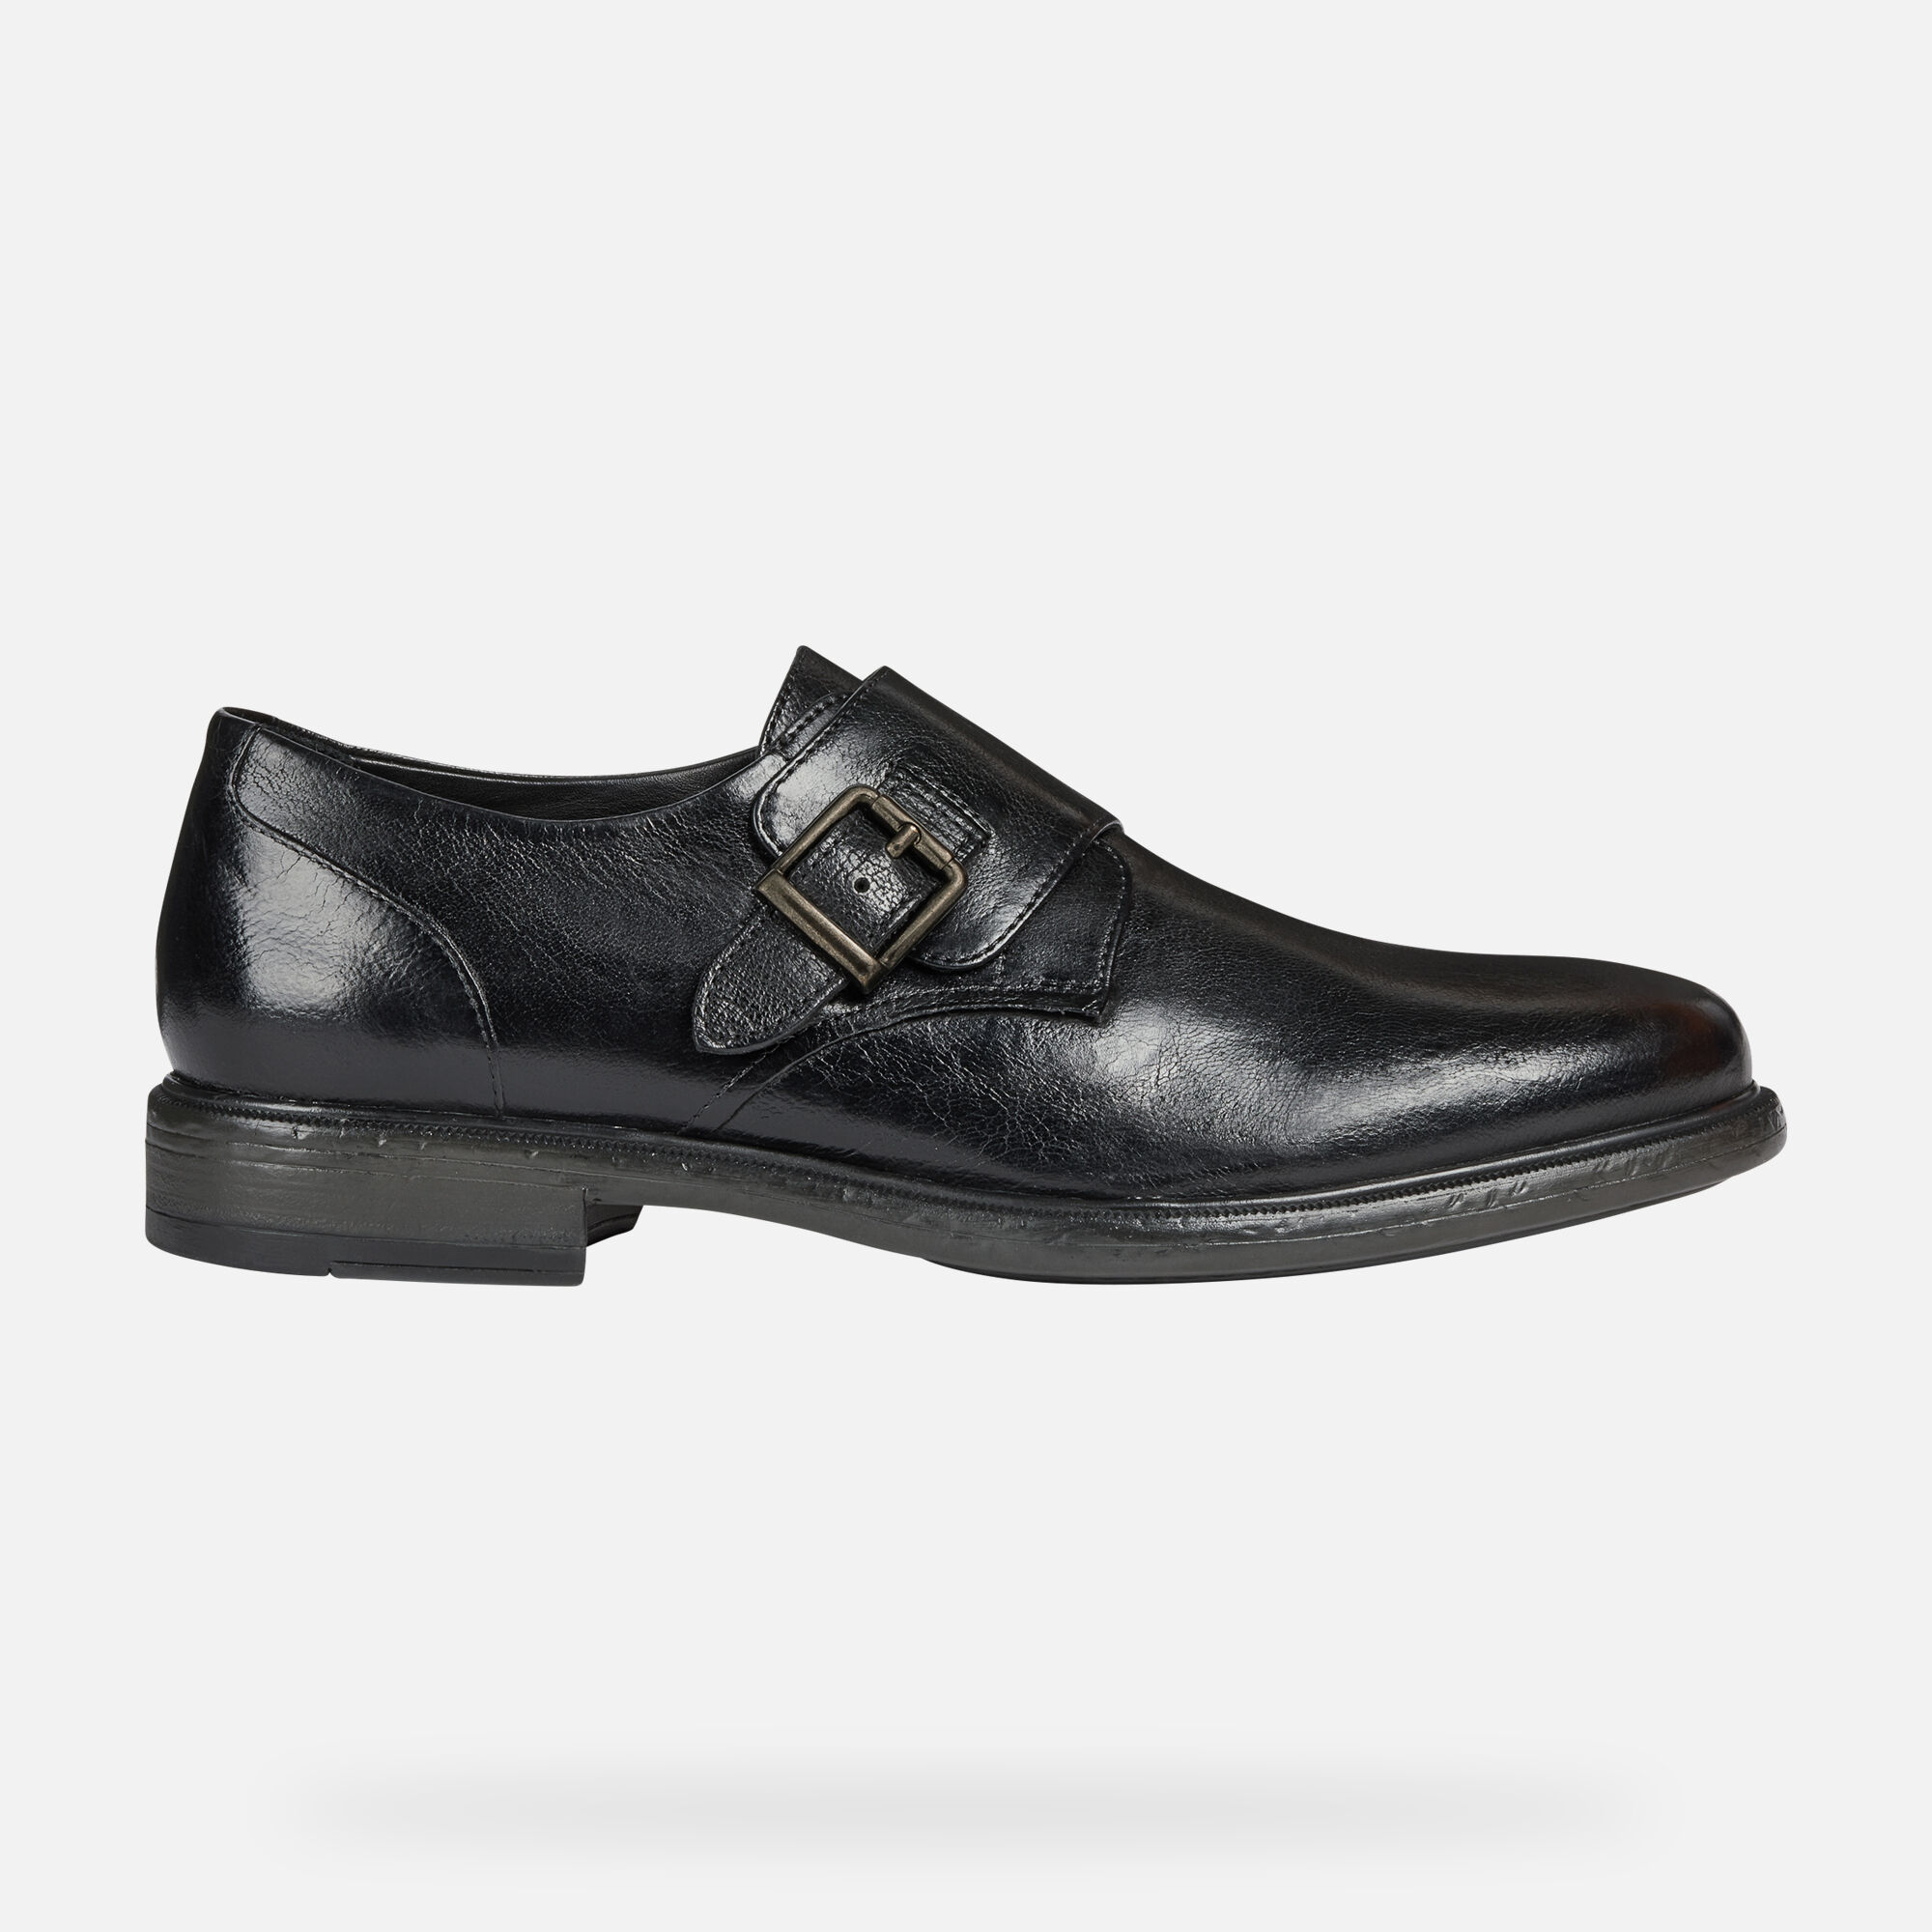 Geox TERENCE Man: Black Shoes | Geox 